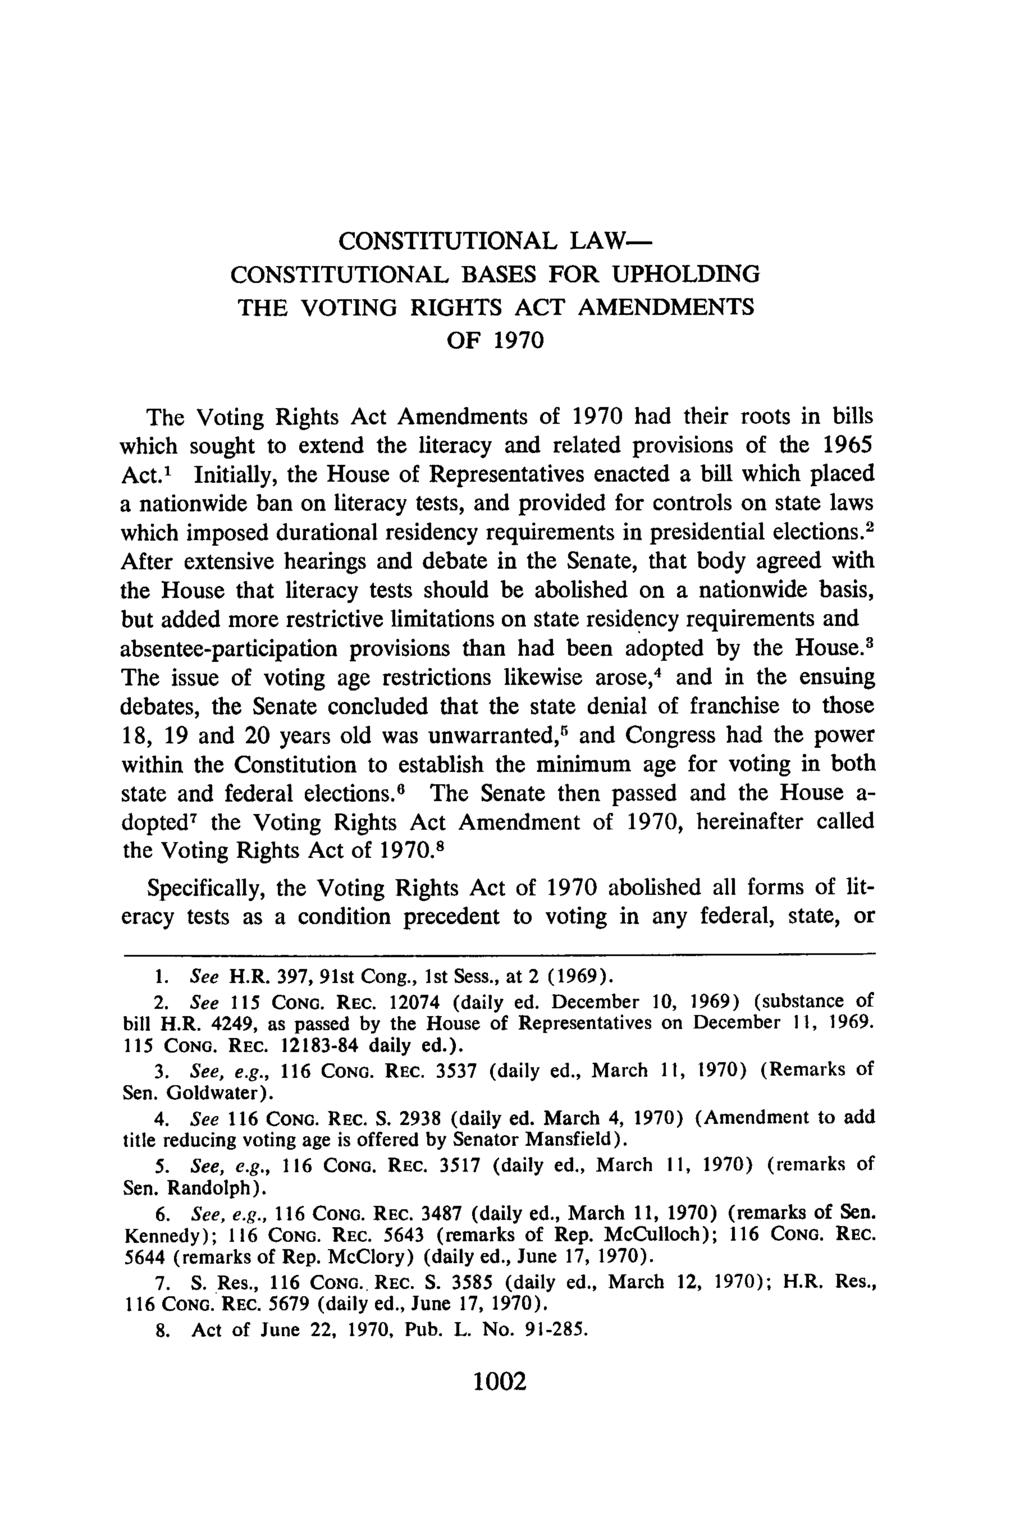 CONSTITUTIONAL LAW- CONSTITUTIONAL BASES FOR UPHOLDING THE VOTING RIGHTS ACT AMENDMENTS OF 1970 The Voting Rights Act Amendments of 1970 had their roots in bills which sought to extend the literacy